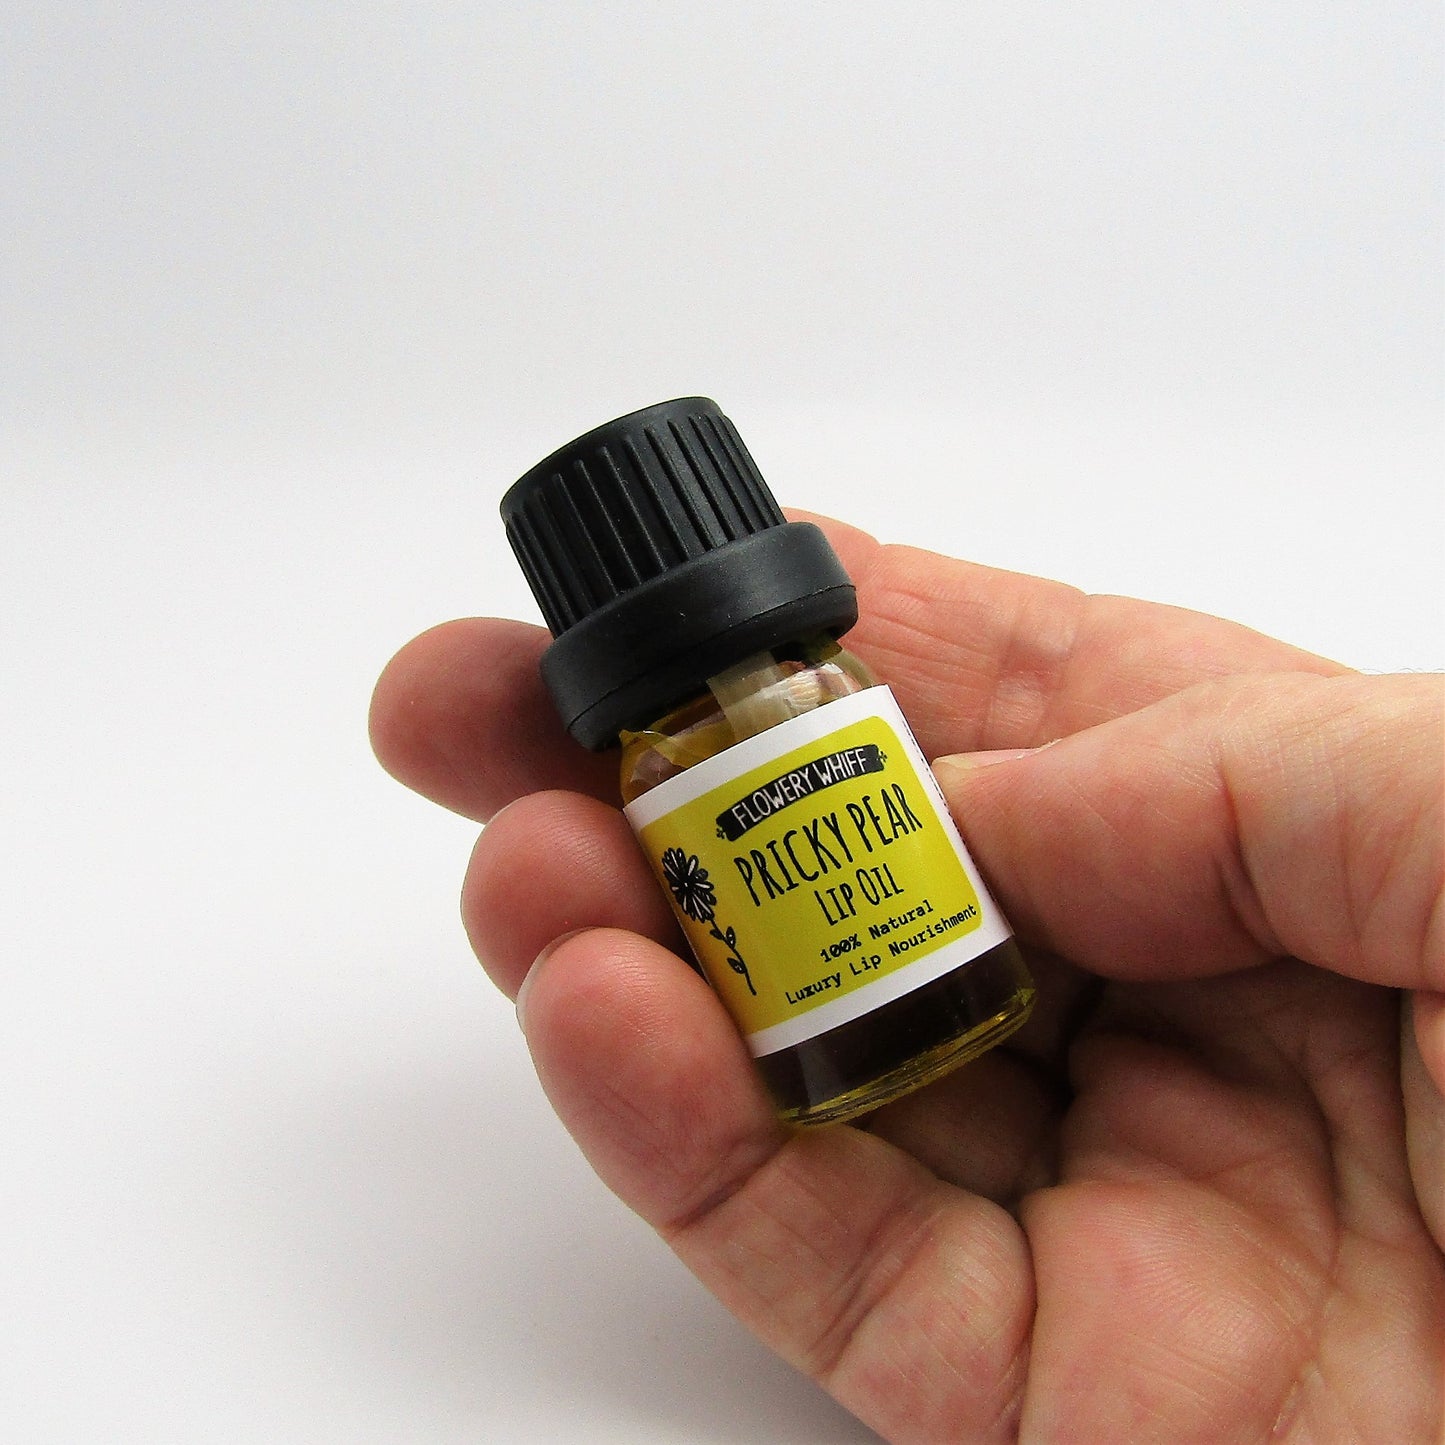 Prickly Pear Seed Lip Oil